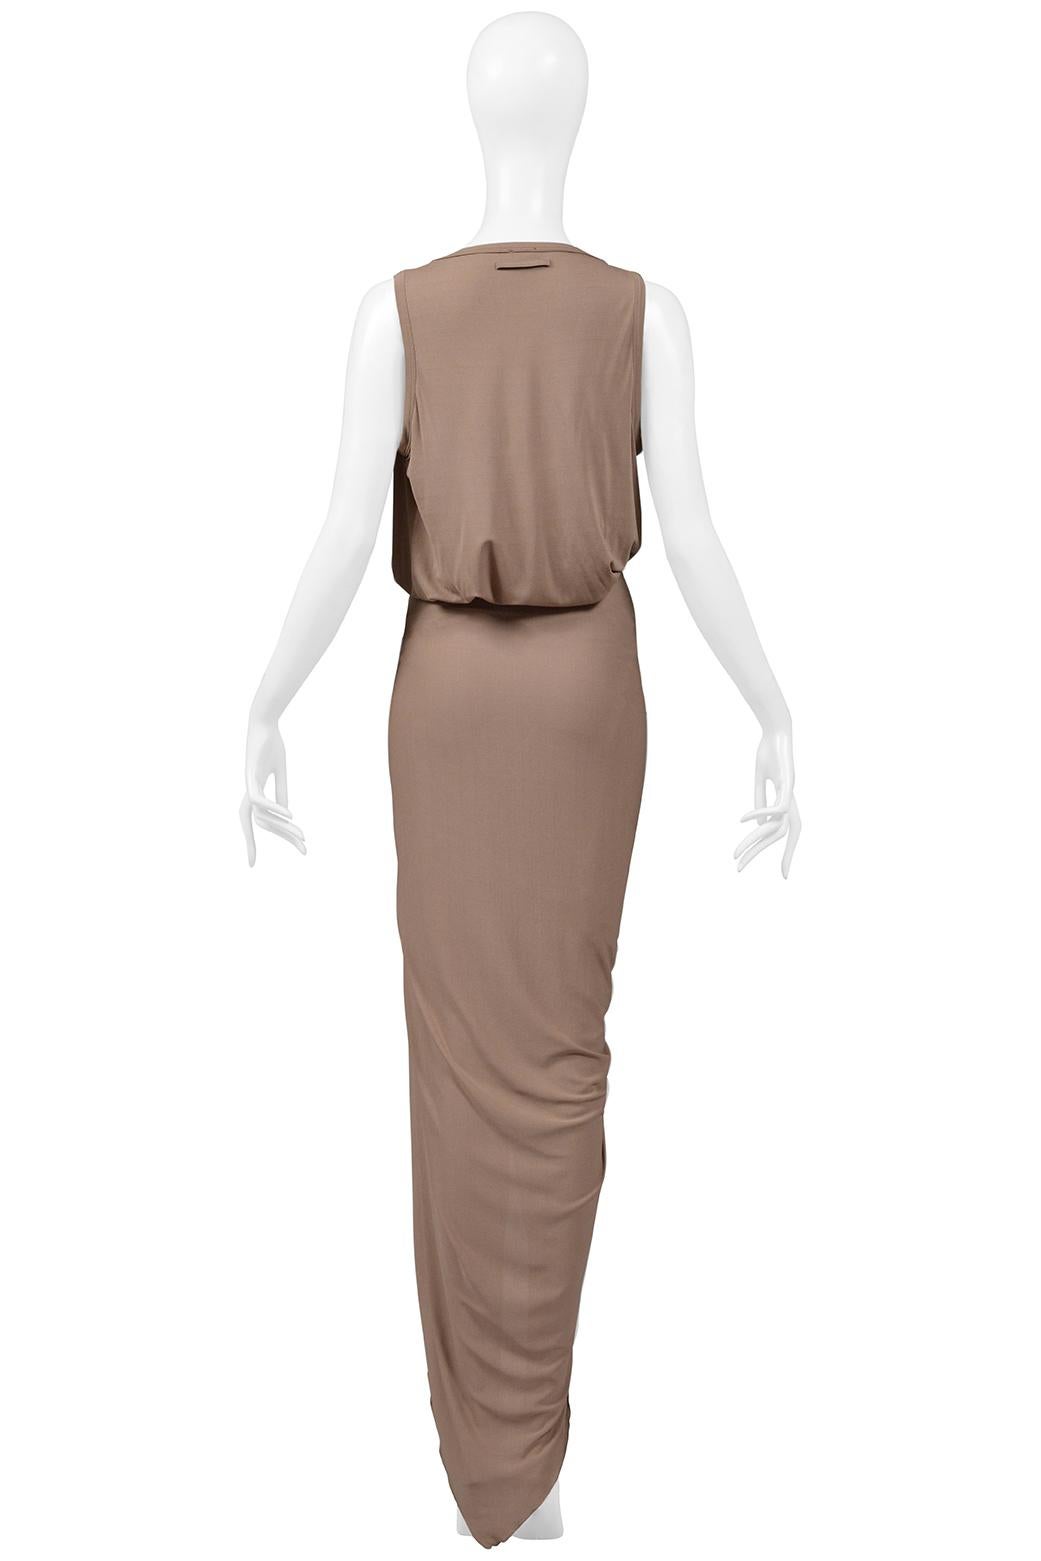 Women's Jean Paul Gaultier Beige Draped Top And Skirt With Decorative Hardware For Sale